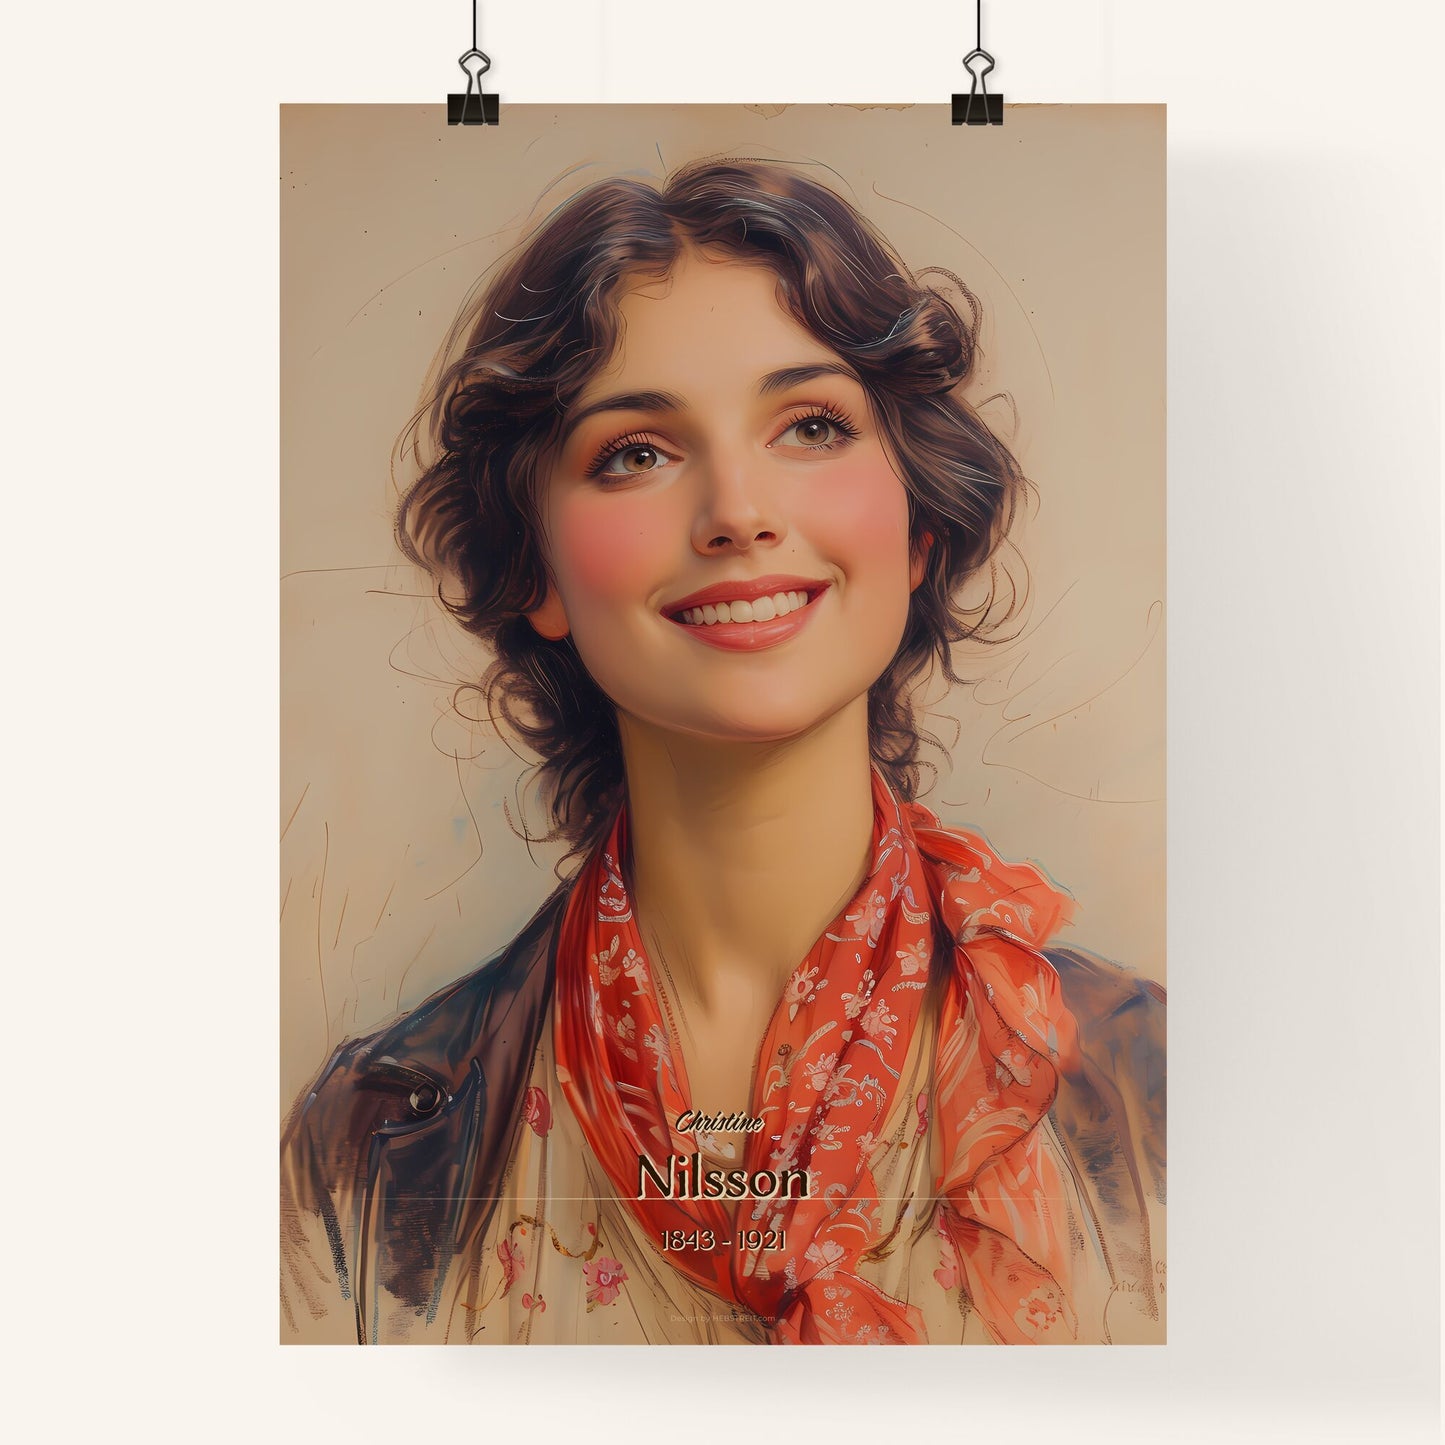 Christine, Nilsson, 1843 - 1921, A Poster of a woman with a red scarf Default Title